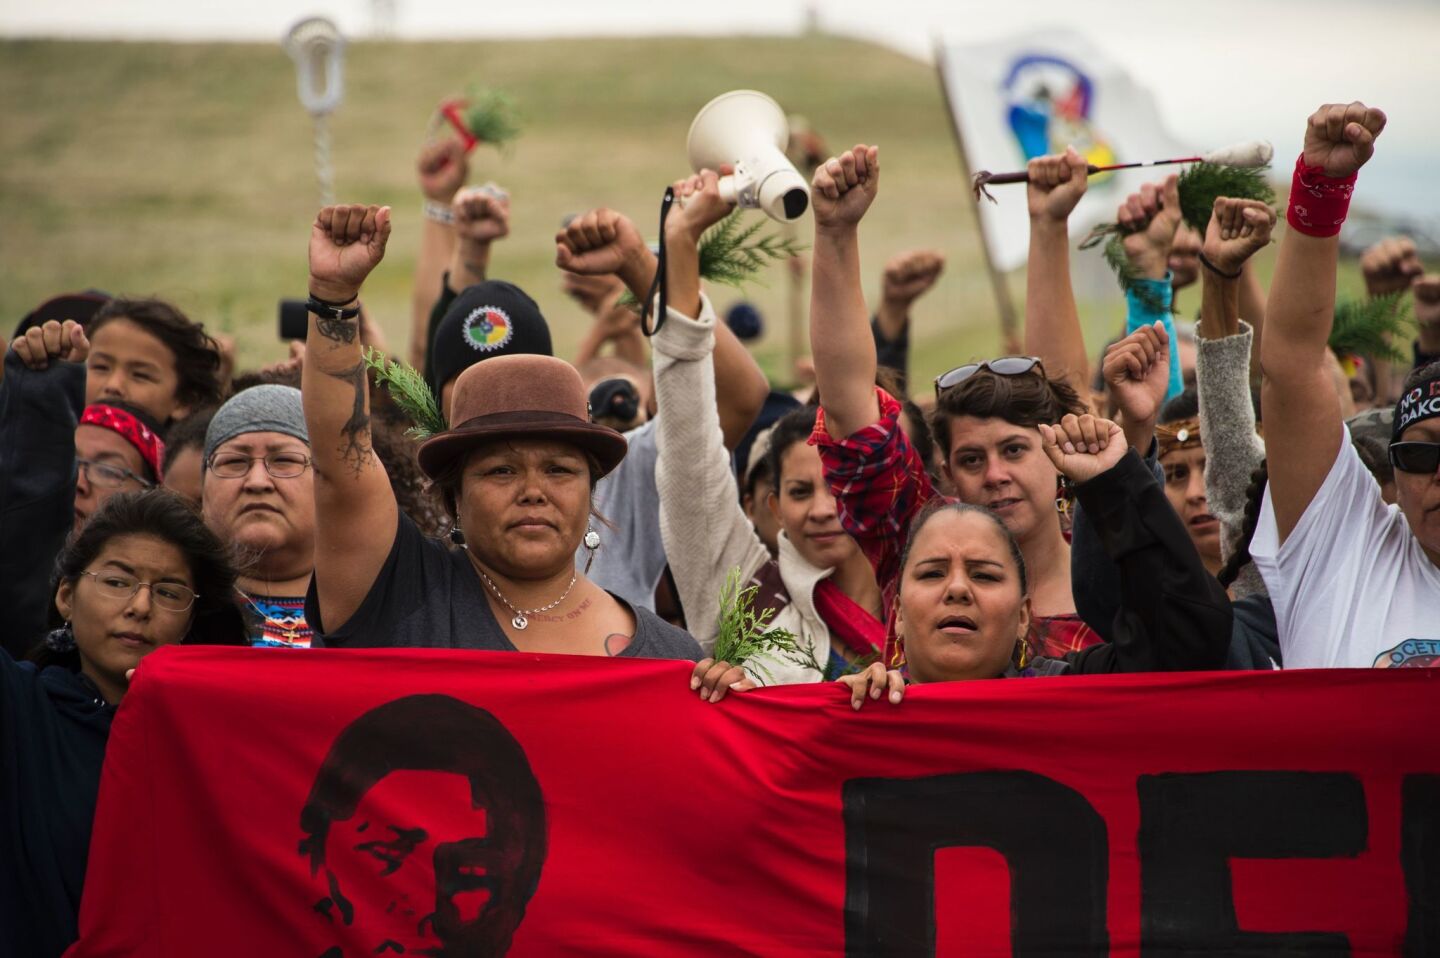 Native Americans march to a sacred burial ground site that was disturbed by bulldozers working on the Dakota Access Pipeline. Hundreds of people have gathered to join the Standing Rock Sioux tribe's protest of the oil pipeline that is slated to cross the Missouri River near Cannon Ball, N.D.